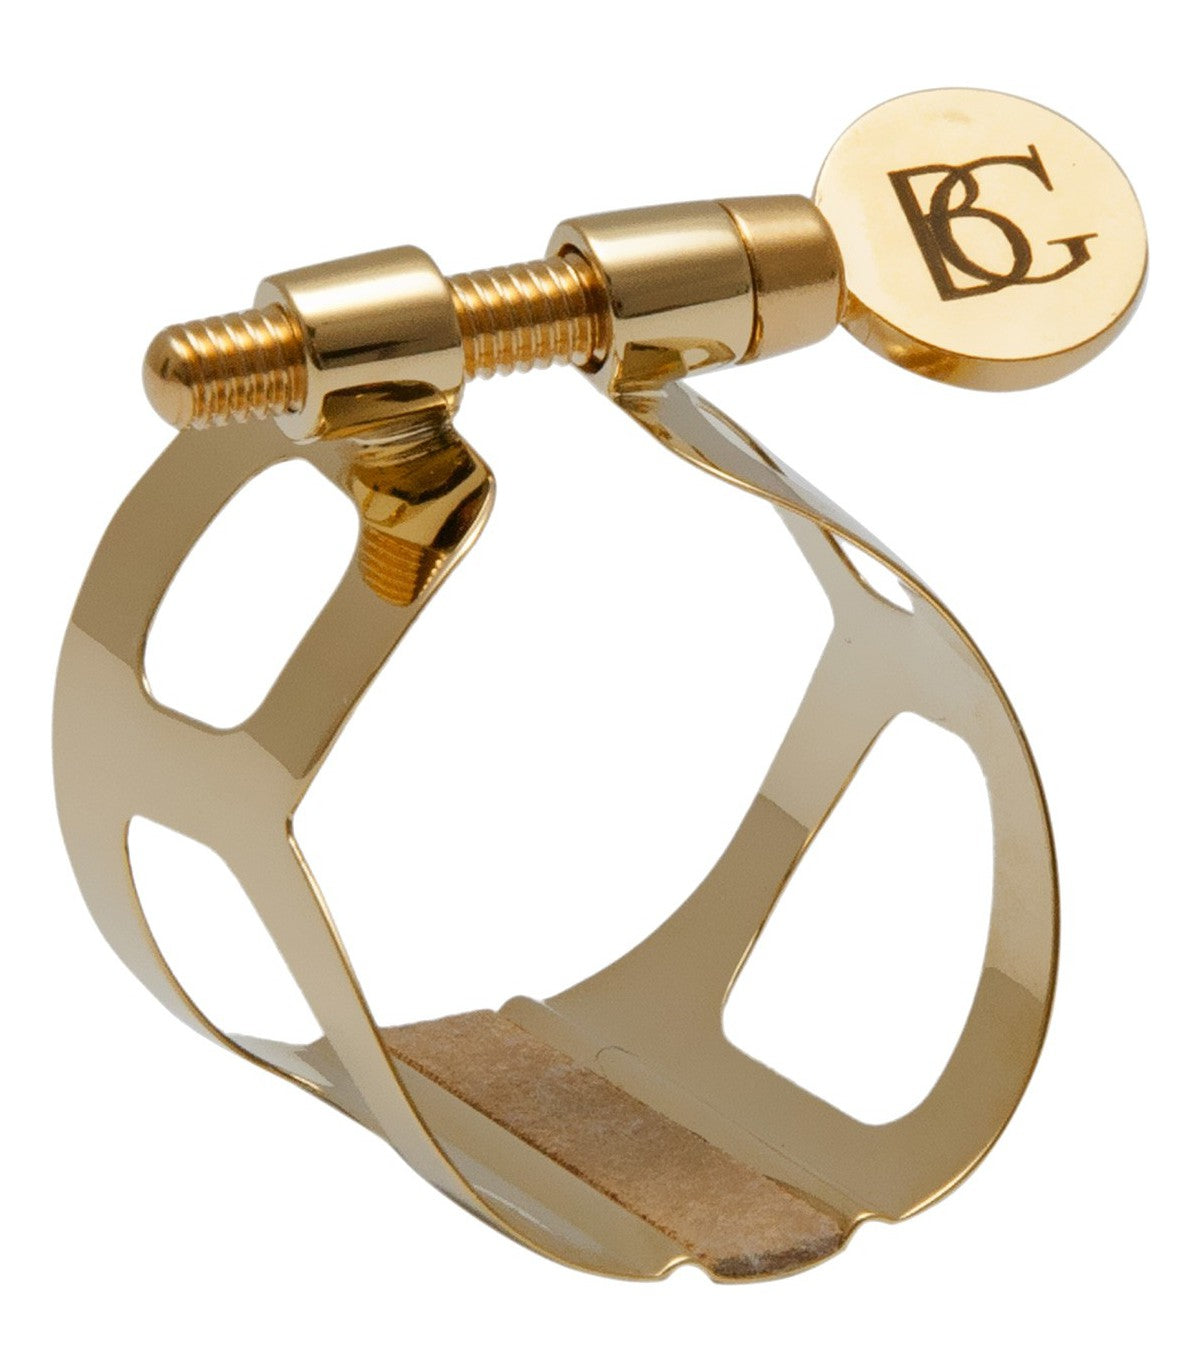 Bass Clarinet Tradition Ligature Metal - Gold Plated